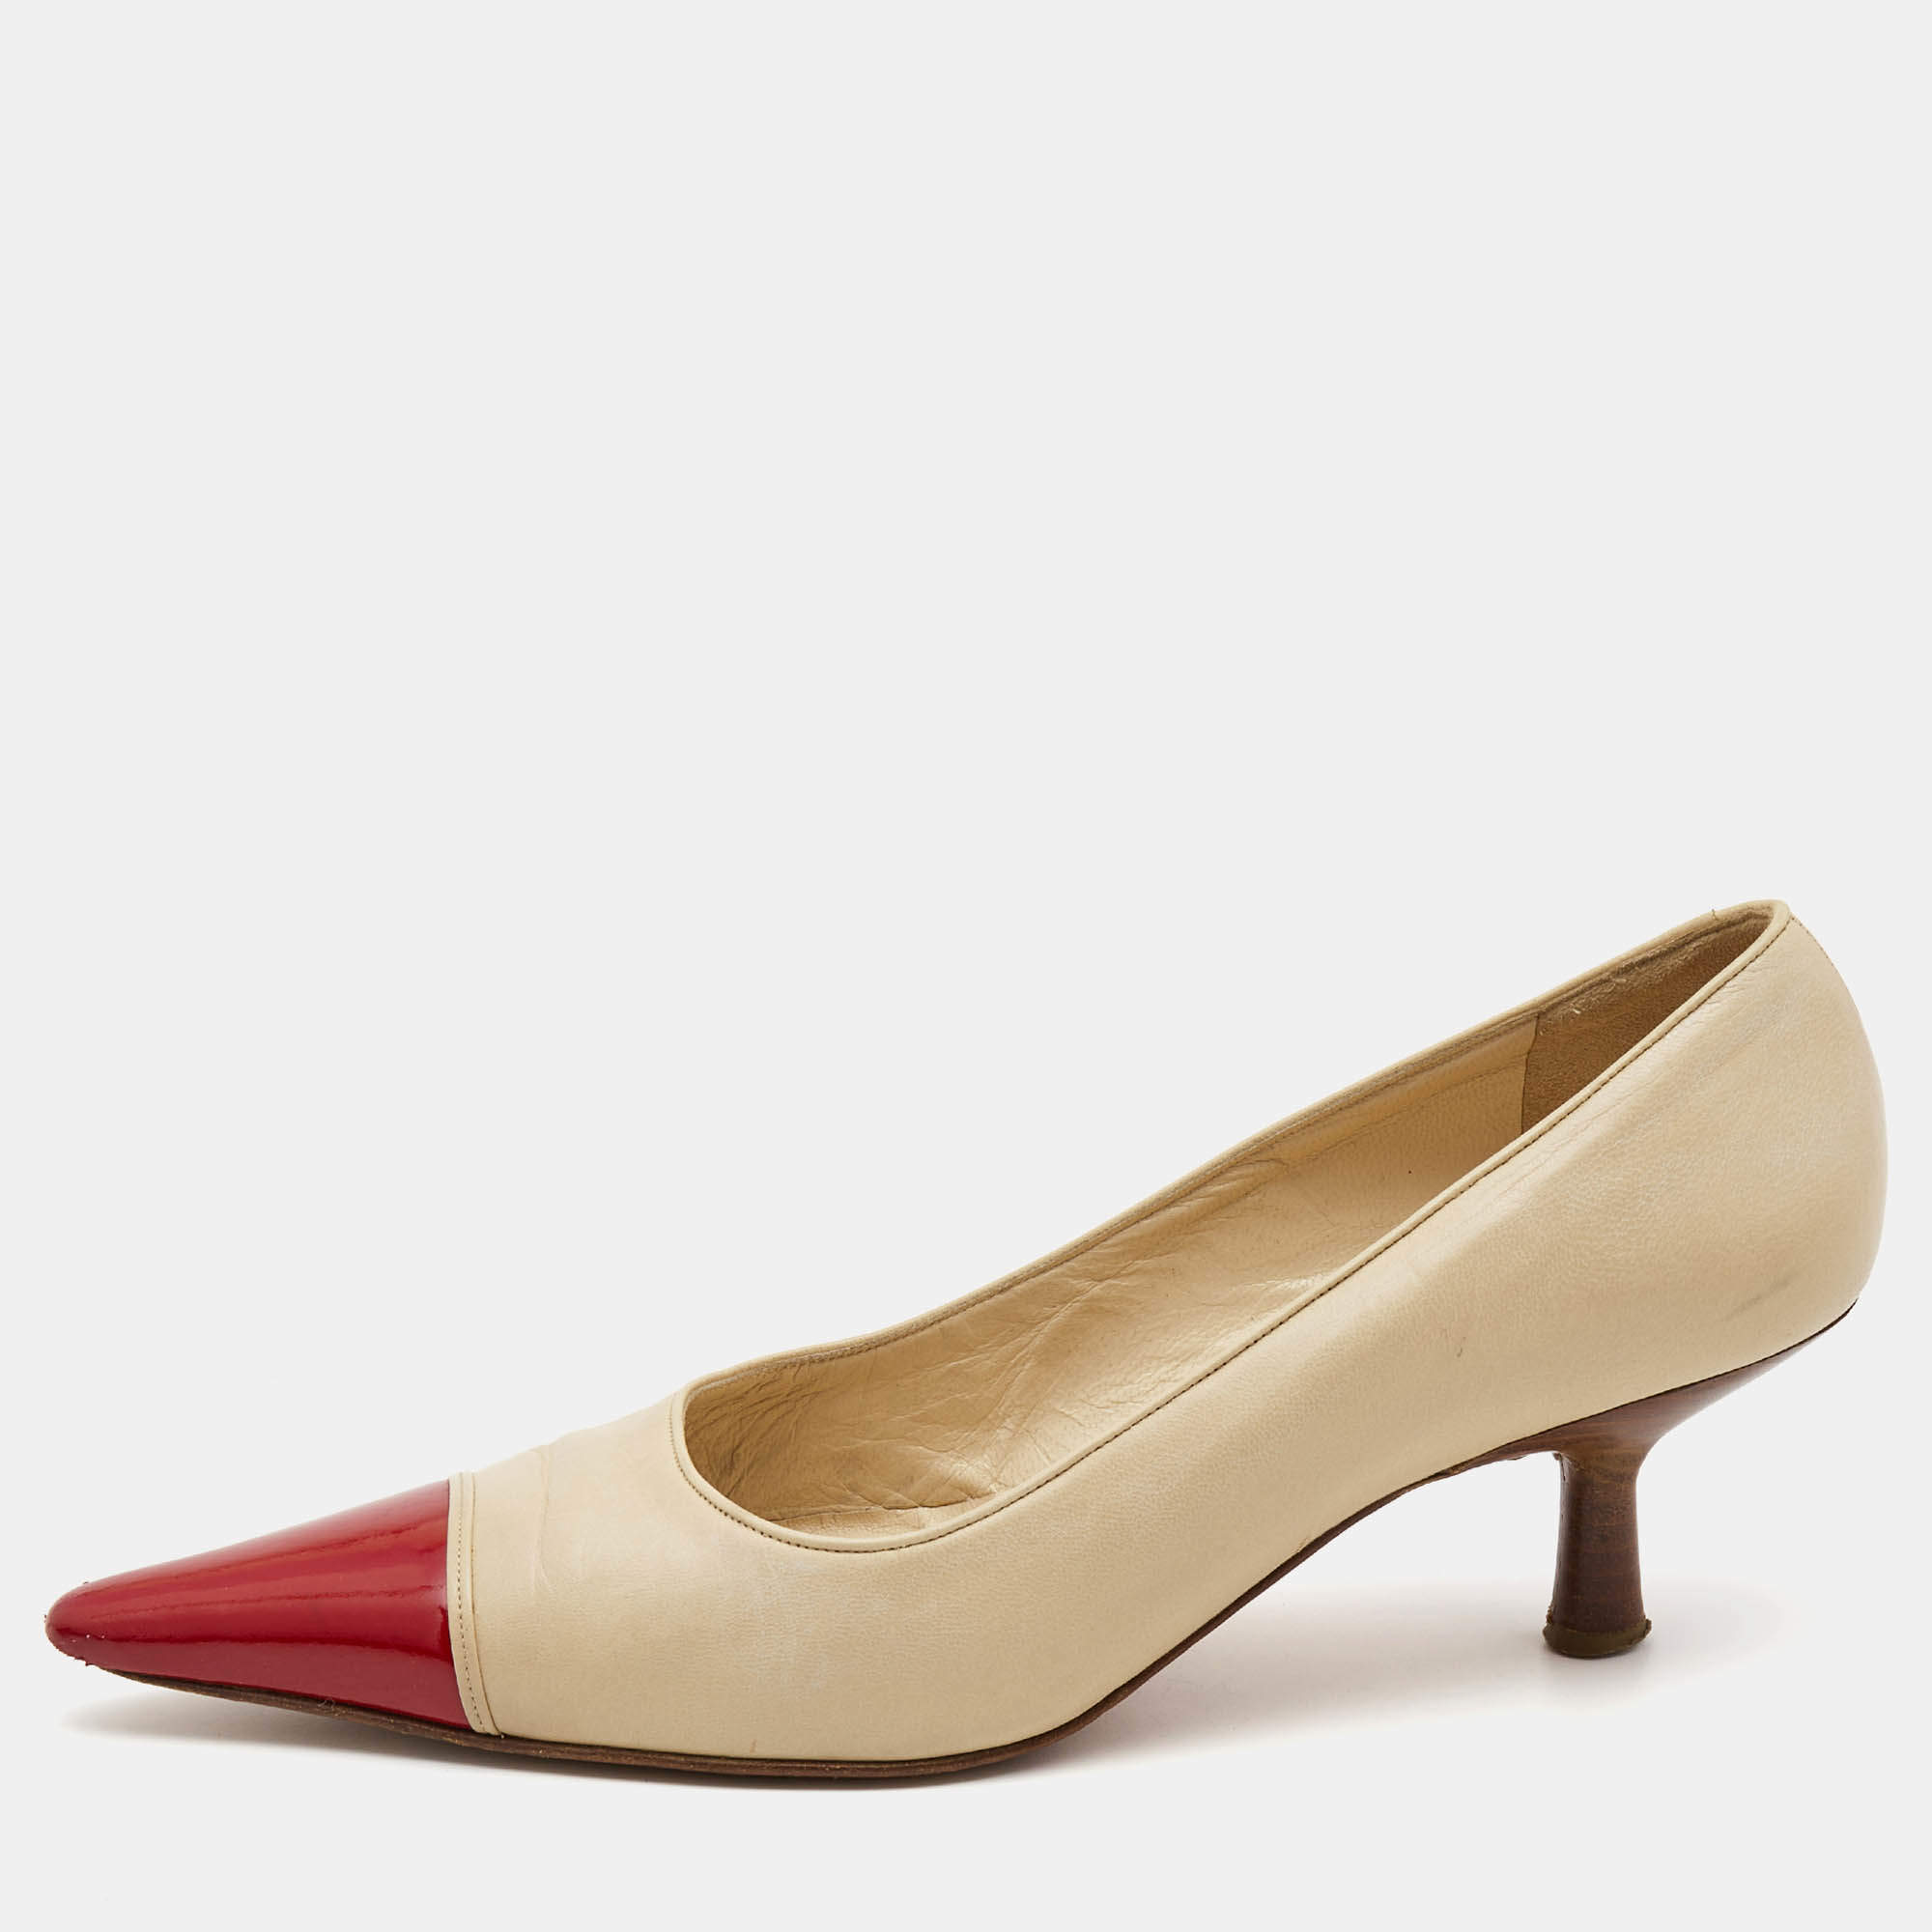 Chanel Beige/Red Patent and Leather Pointed Toe Pumps Size 38.5 Chanel